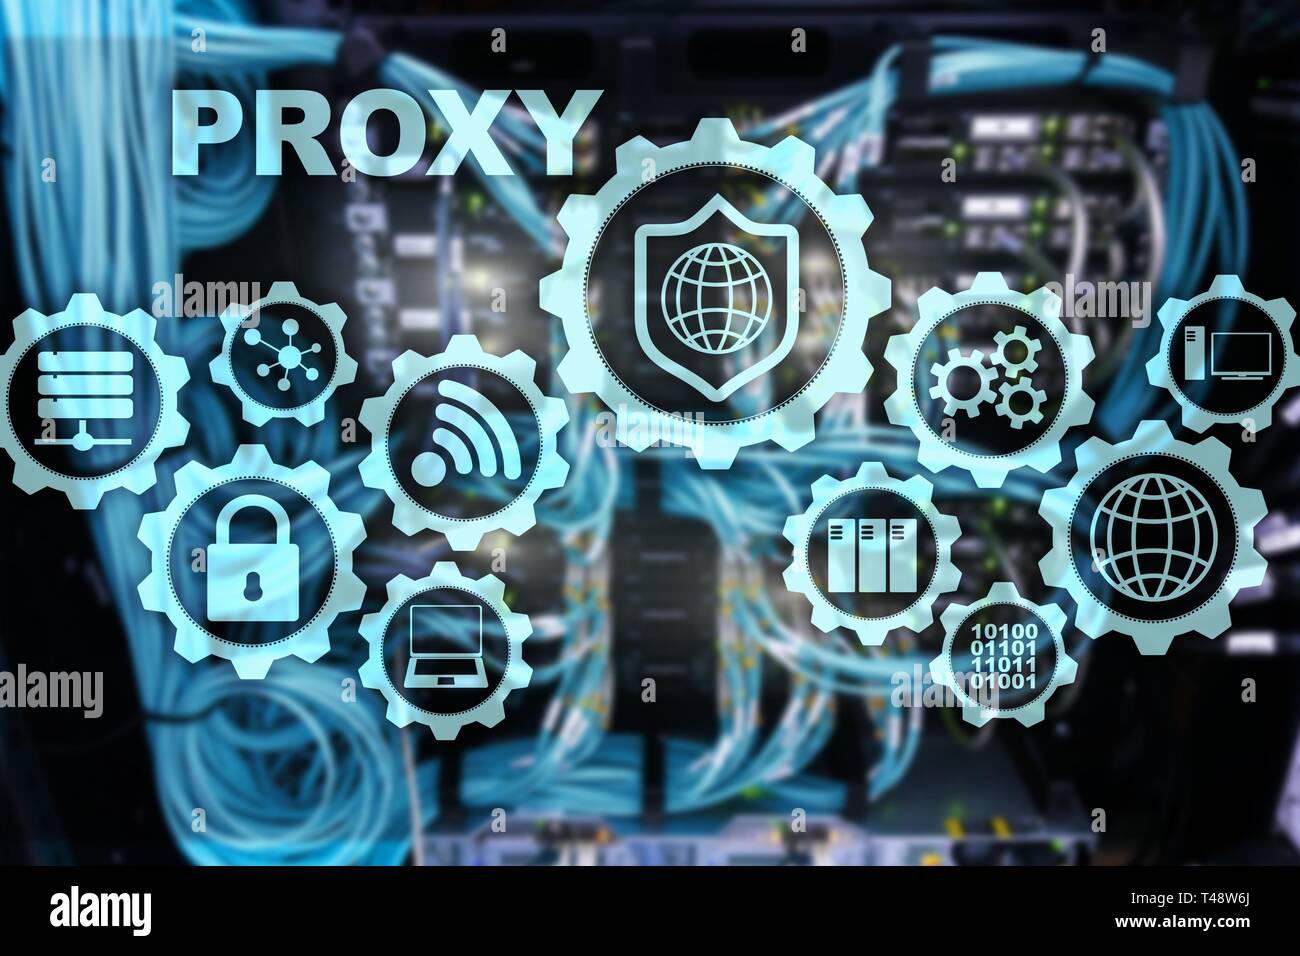 Proxy server. Cyber security. Concept of network security on virtual screen. Server room background Stock Photo